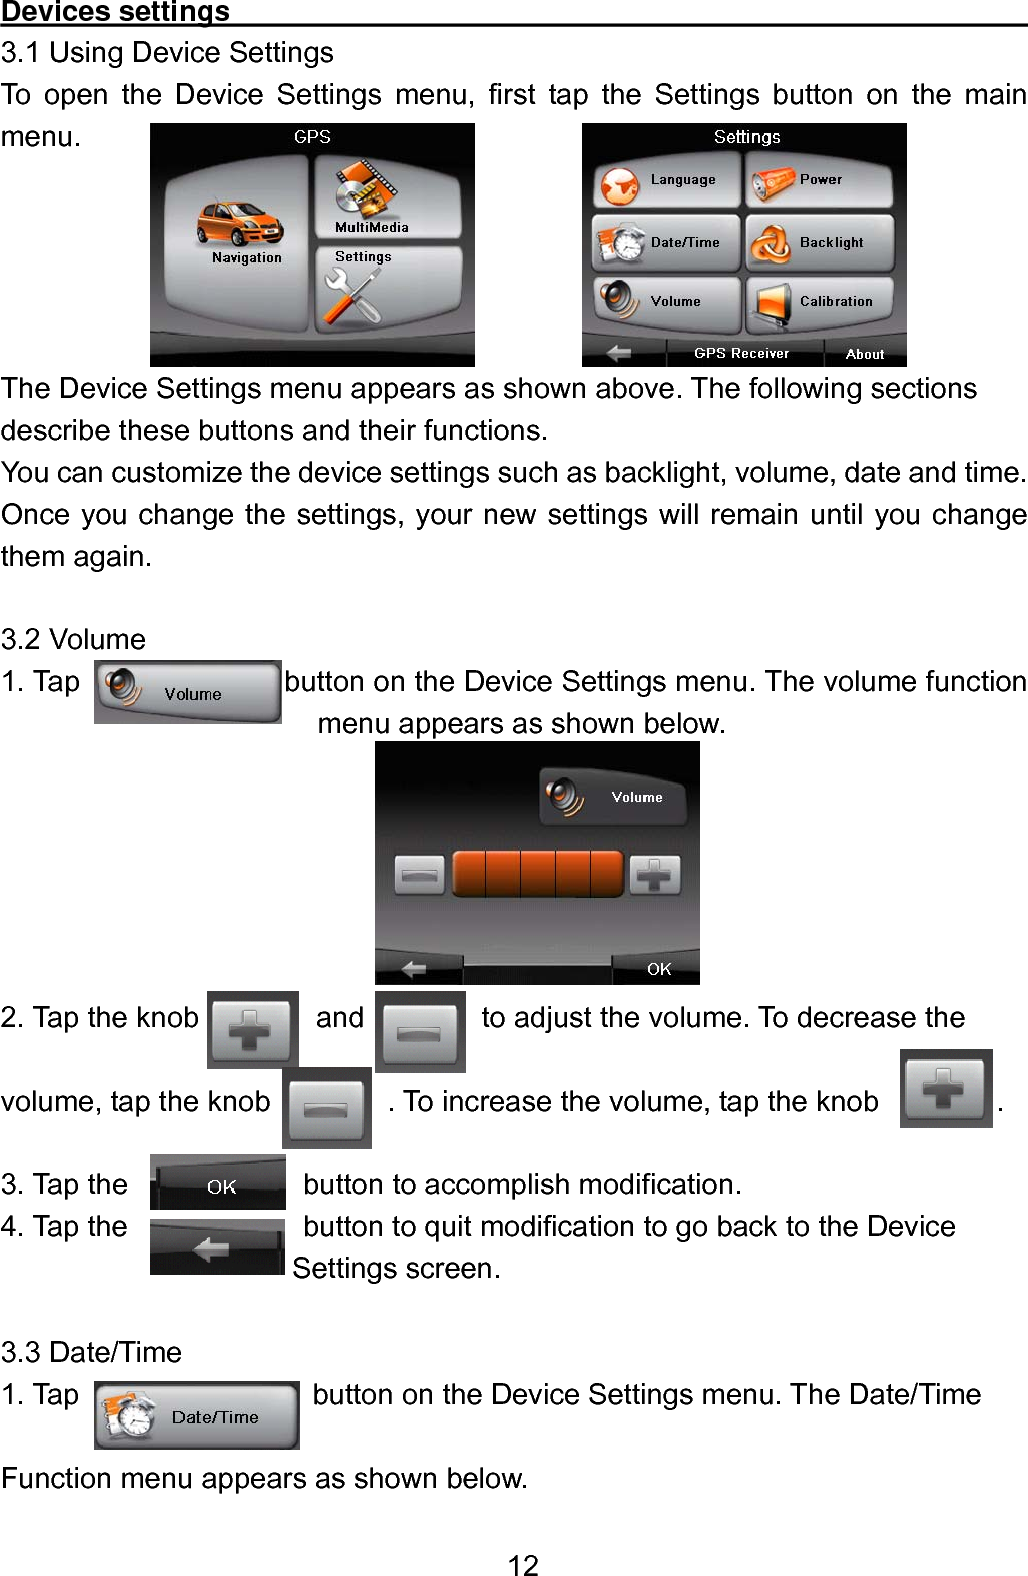  12Devices settings                                                        3.1 Using Device Settings To open the Device Settings menu, first tap the Settings button on the main menu.      The Device Settings menu appears as shown above. The following sections describe these buttons and their functions. You can customize the device settings such as backlight, volume, date and time. Once you change the settings, your new settings will remain until you change them again.  3.2 Volume 1. Tap              button on the Device Settings menu. The volume function menu appears as shown below.            2. Tap the knob        and          to adjust the volume. To decrease the    volume, tap the knob        . To increase the volume, tap the knob        .  3. Tap the            button to accomplish modification.     4. Tap the            button to quit modification to go back to the Device Settings screen.  3.3 Date/Time 1. Tap                button on the Device Settings menu. The Date/Time    Function menu appears as shown below.   